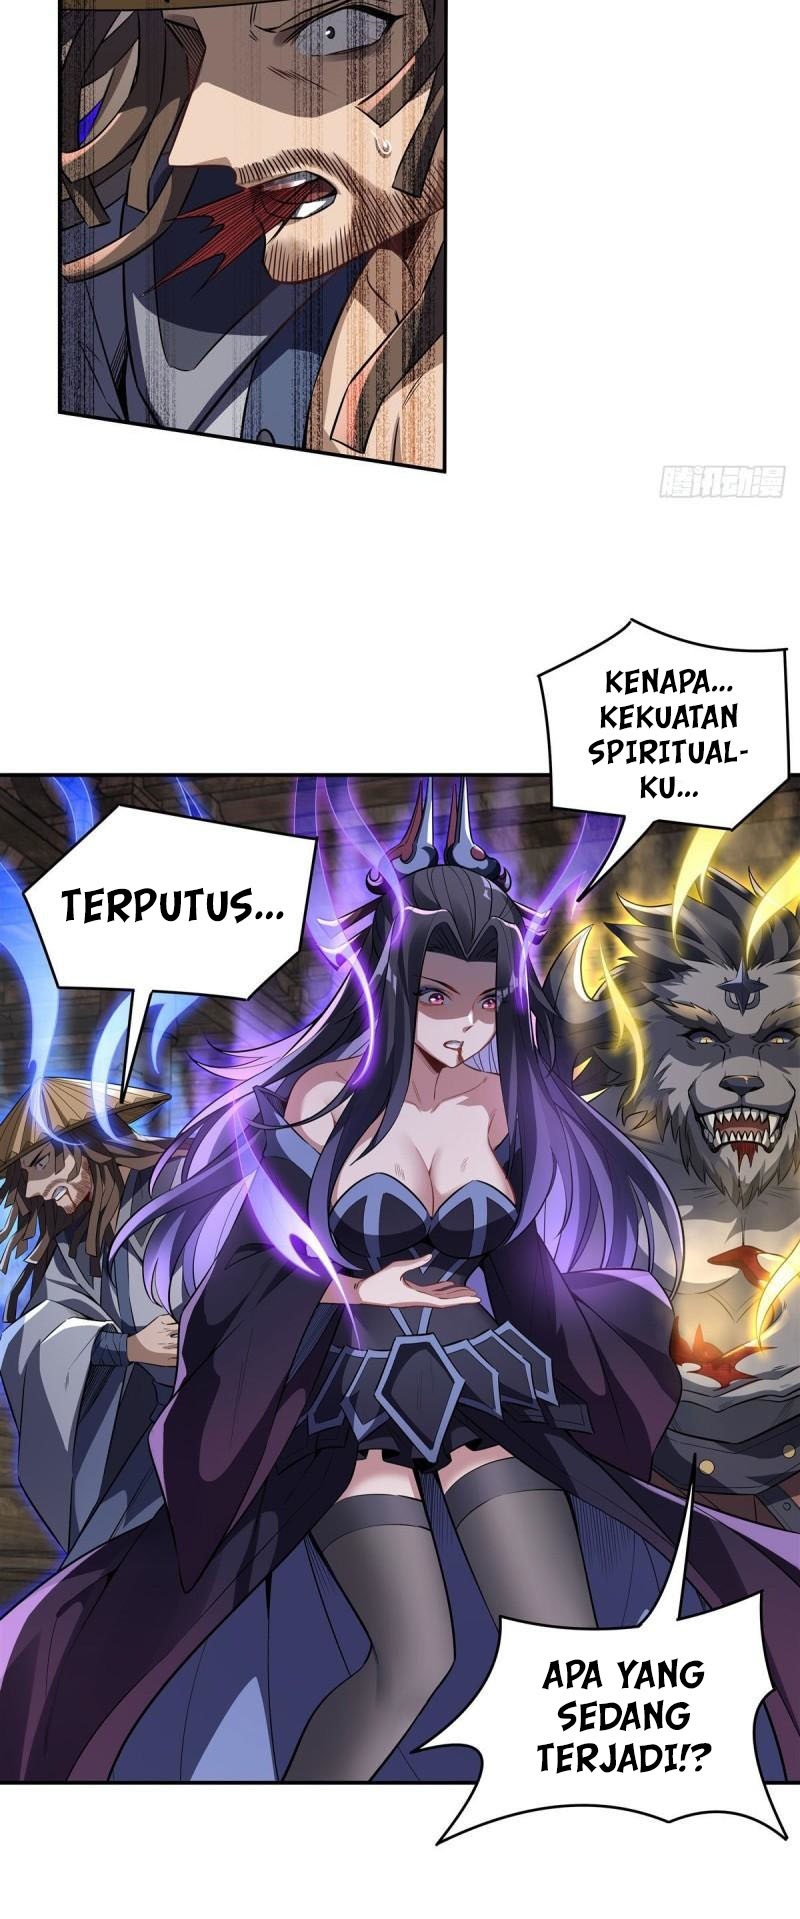 Dilarang COPAS - situs resmi www.mangacanblog.com - Komik my female apprentices are all big shots from the future 067 - chapter 67 68 Indonesia my female apprentices are all big shots from the future 067 - chapter 67 Terbaru 3|Baca Manga Komik Indonesia|Mangacan